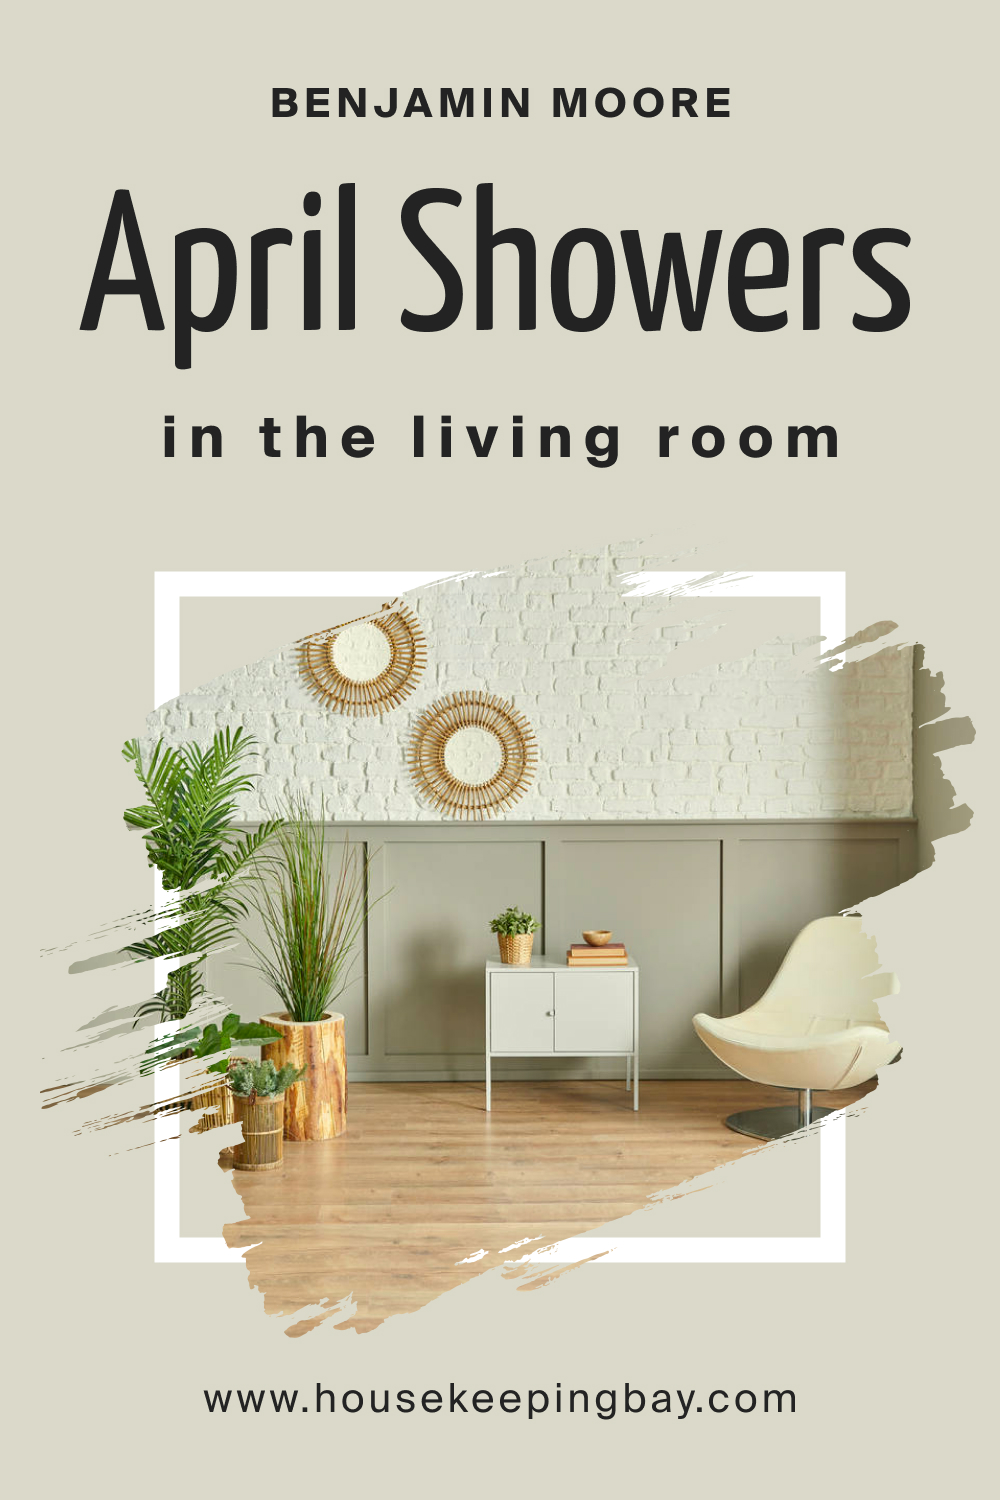 How to Use BM April Showers 1507 in the Living Room?